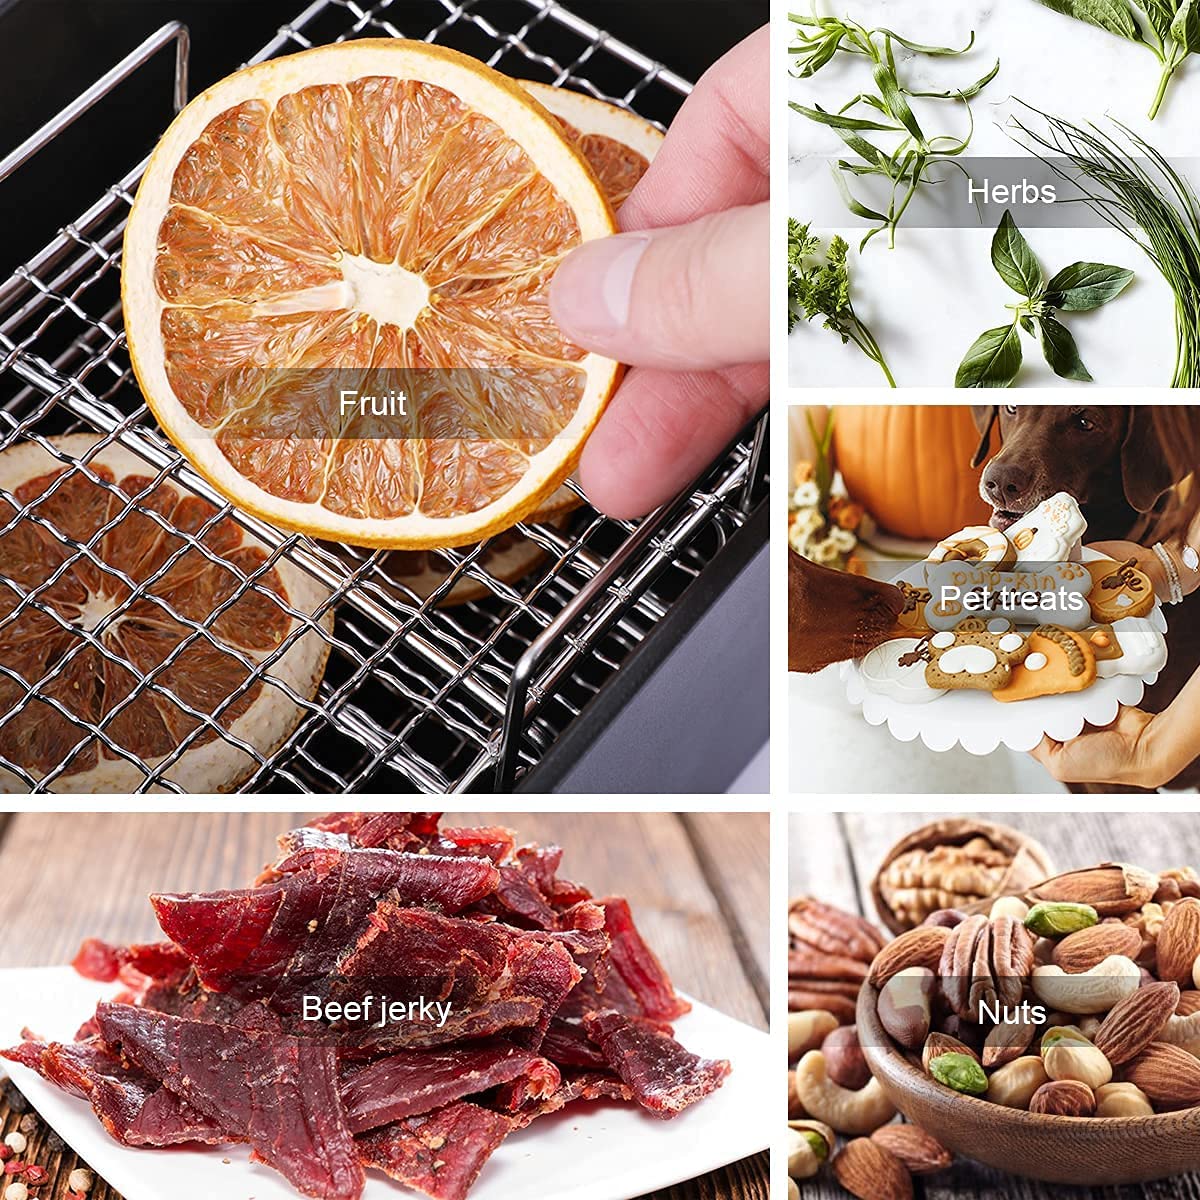 air fryer rack make it easier than ever to dehydrate fruits, nuts, meats, beef jerky, herbs and pet treats.